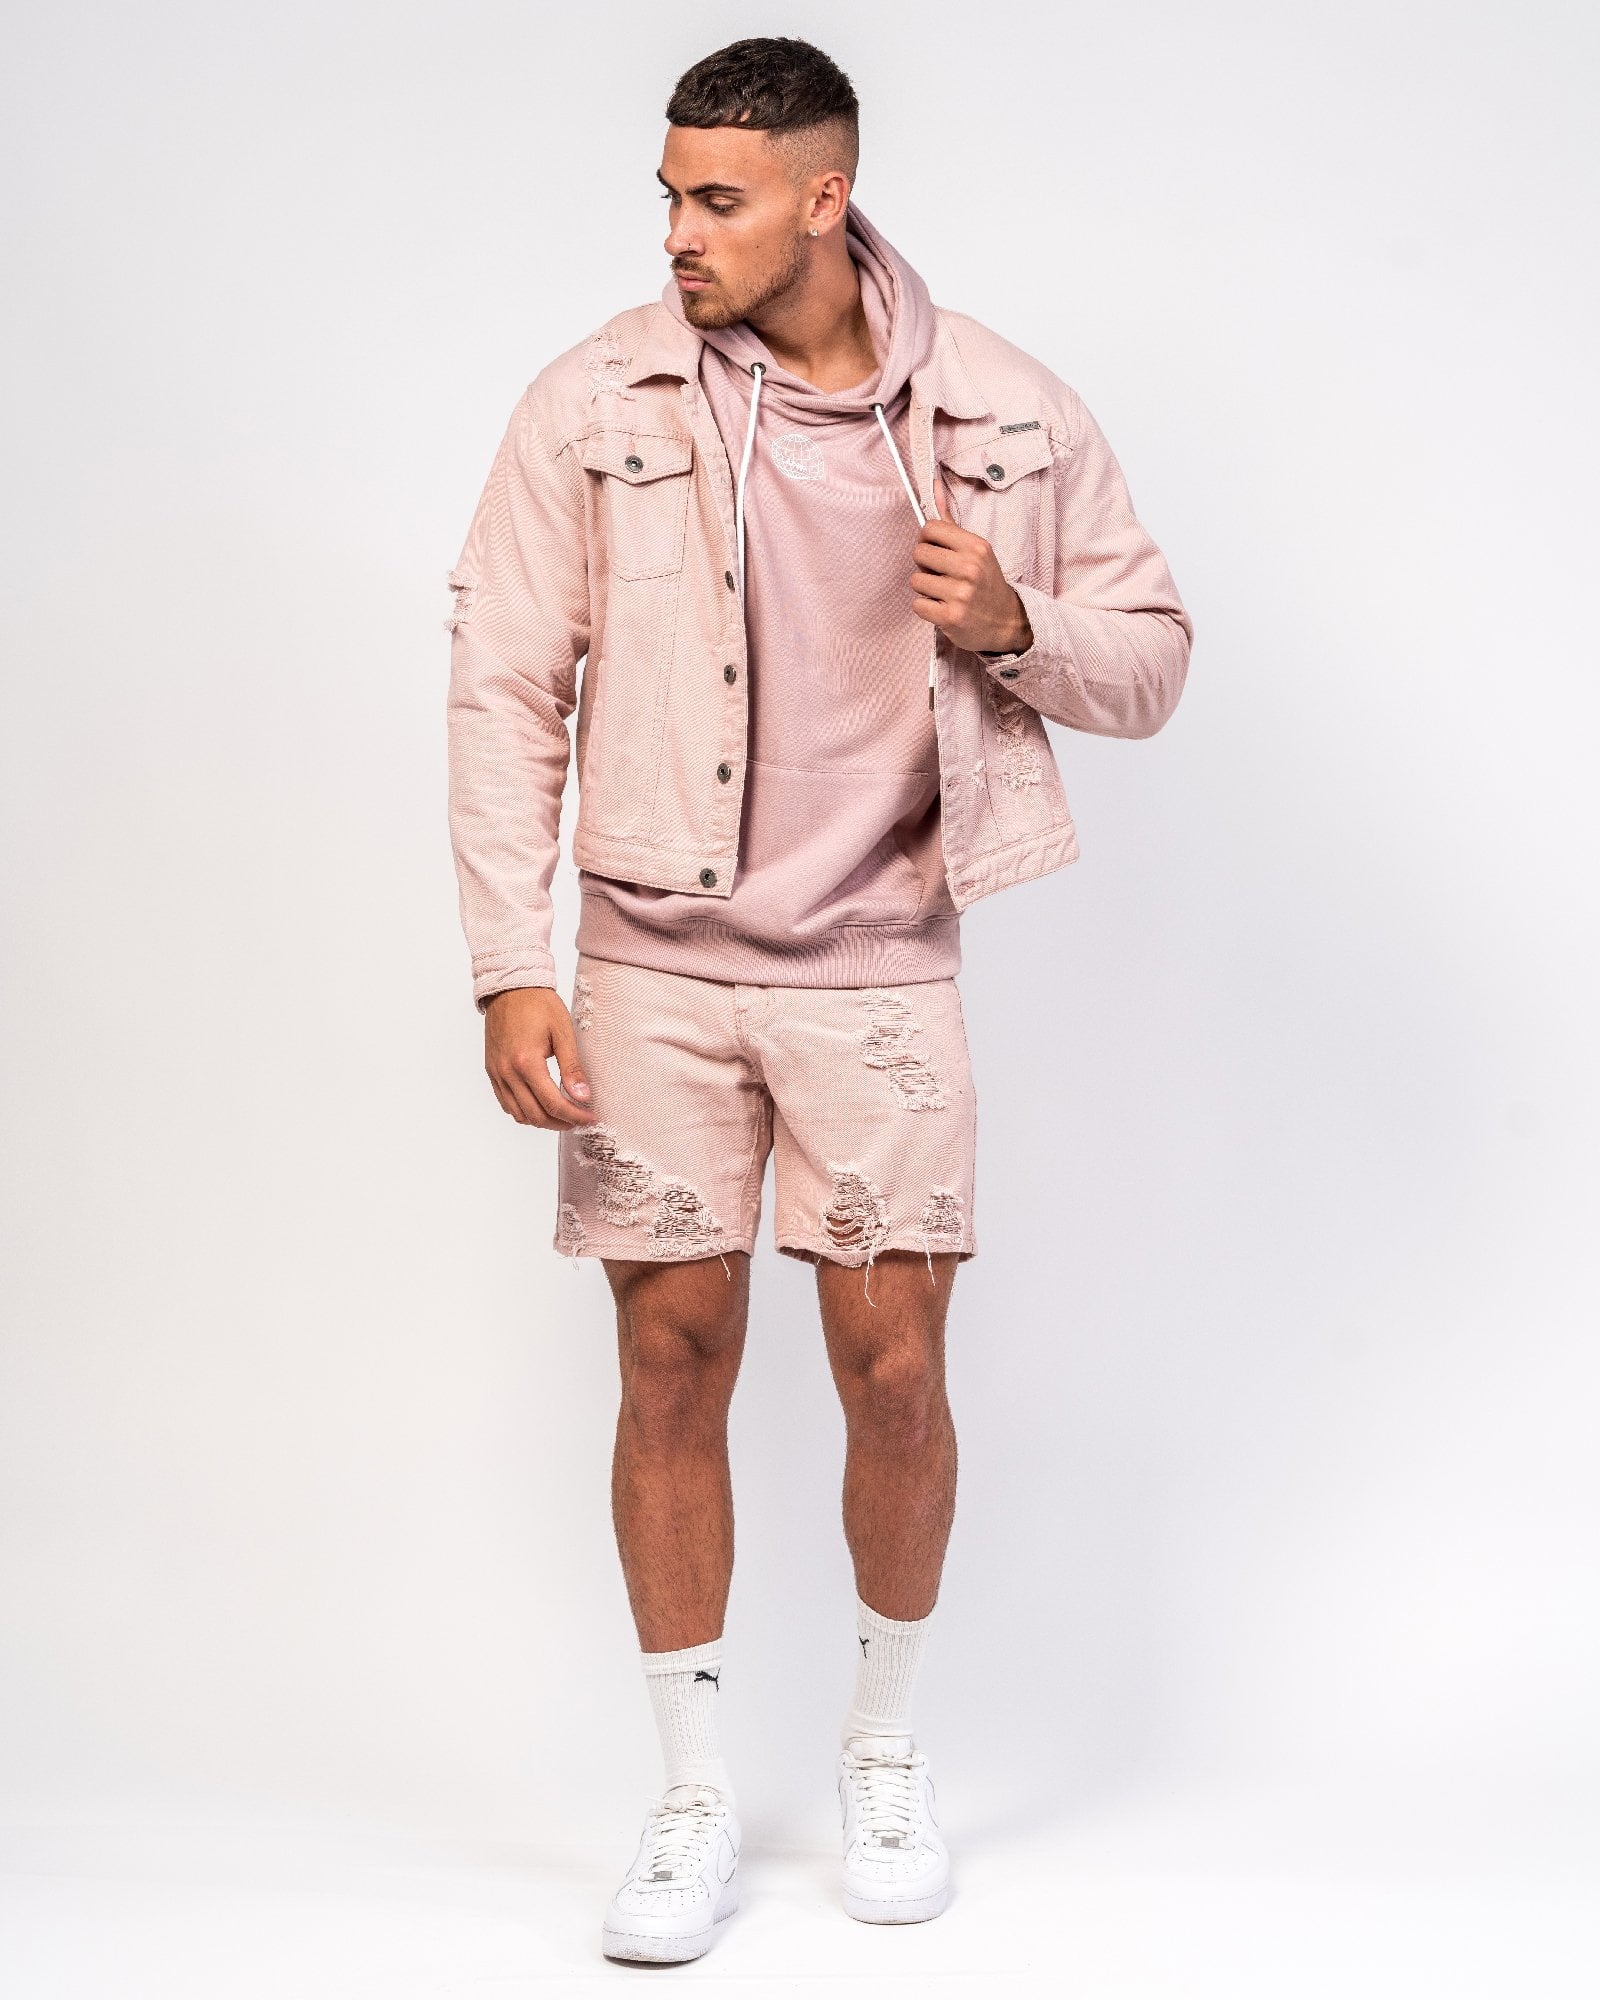 Oversized Denim Jacket In Pink With Distressing